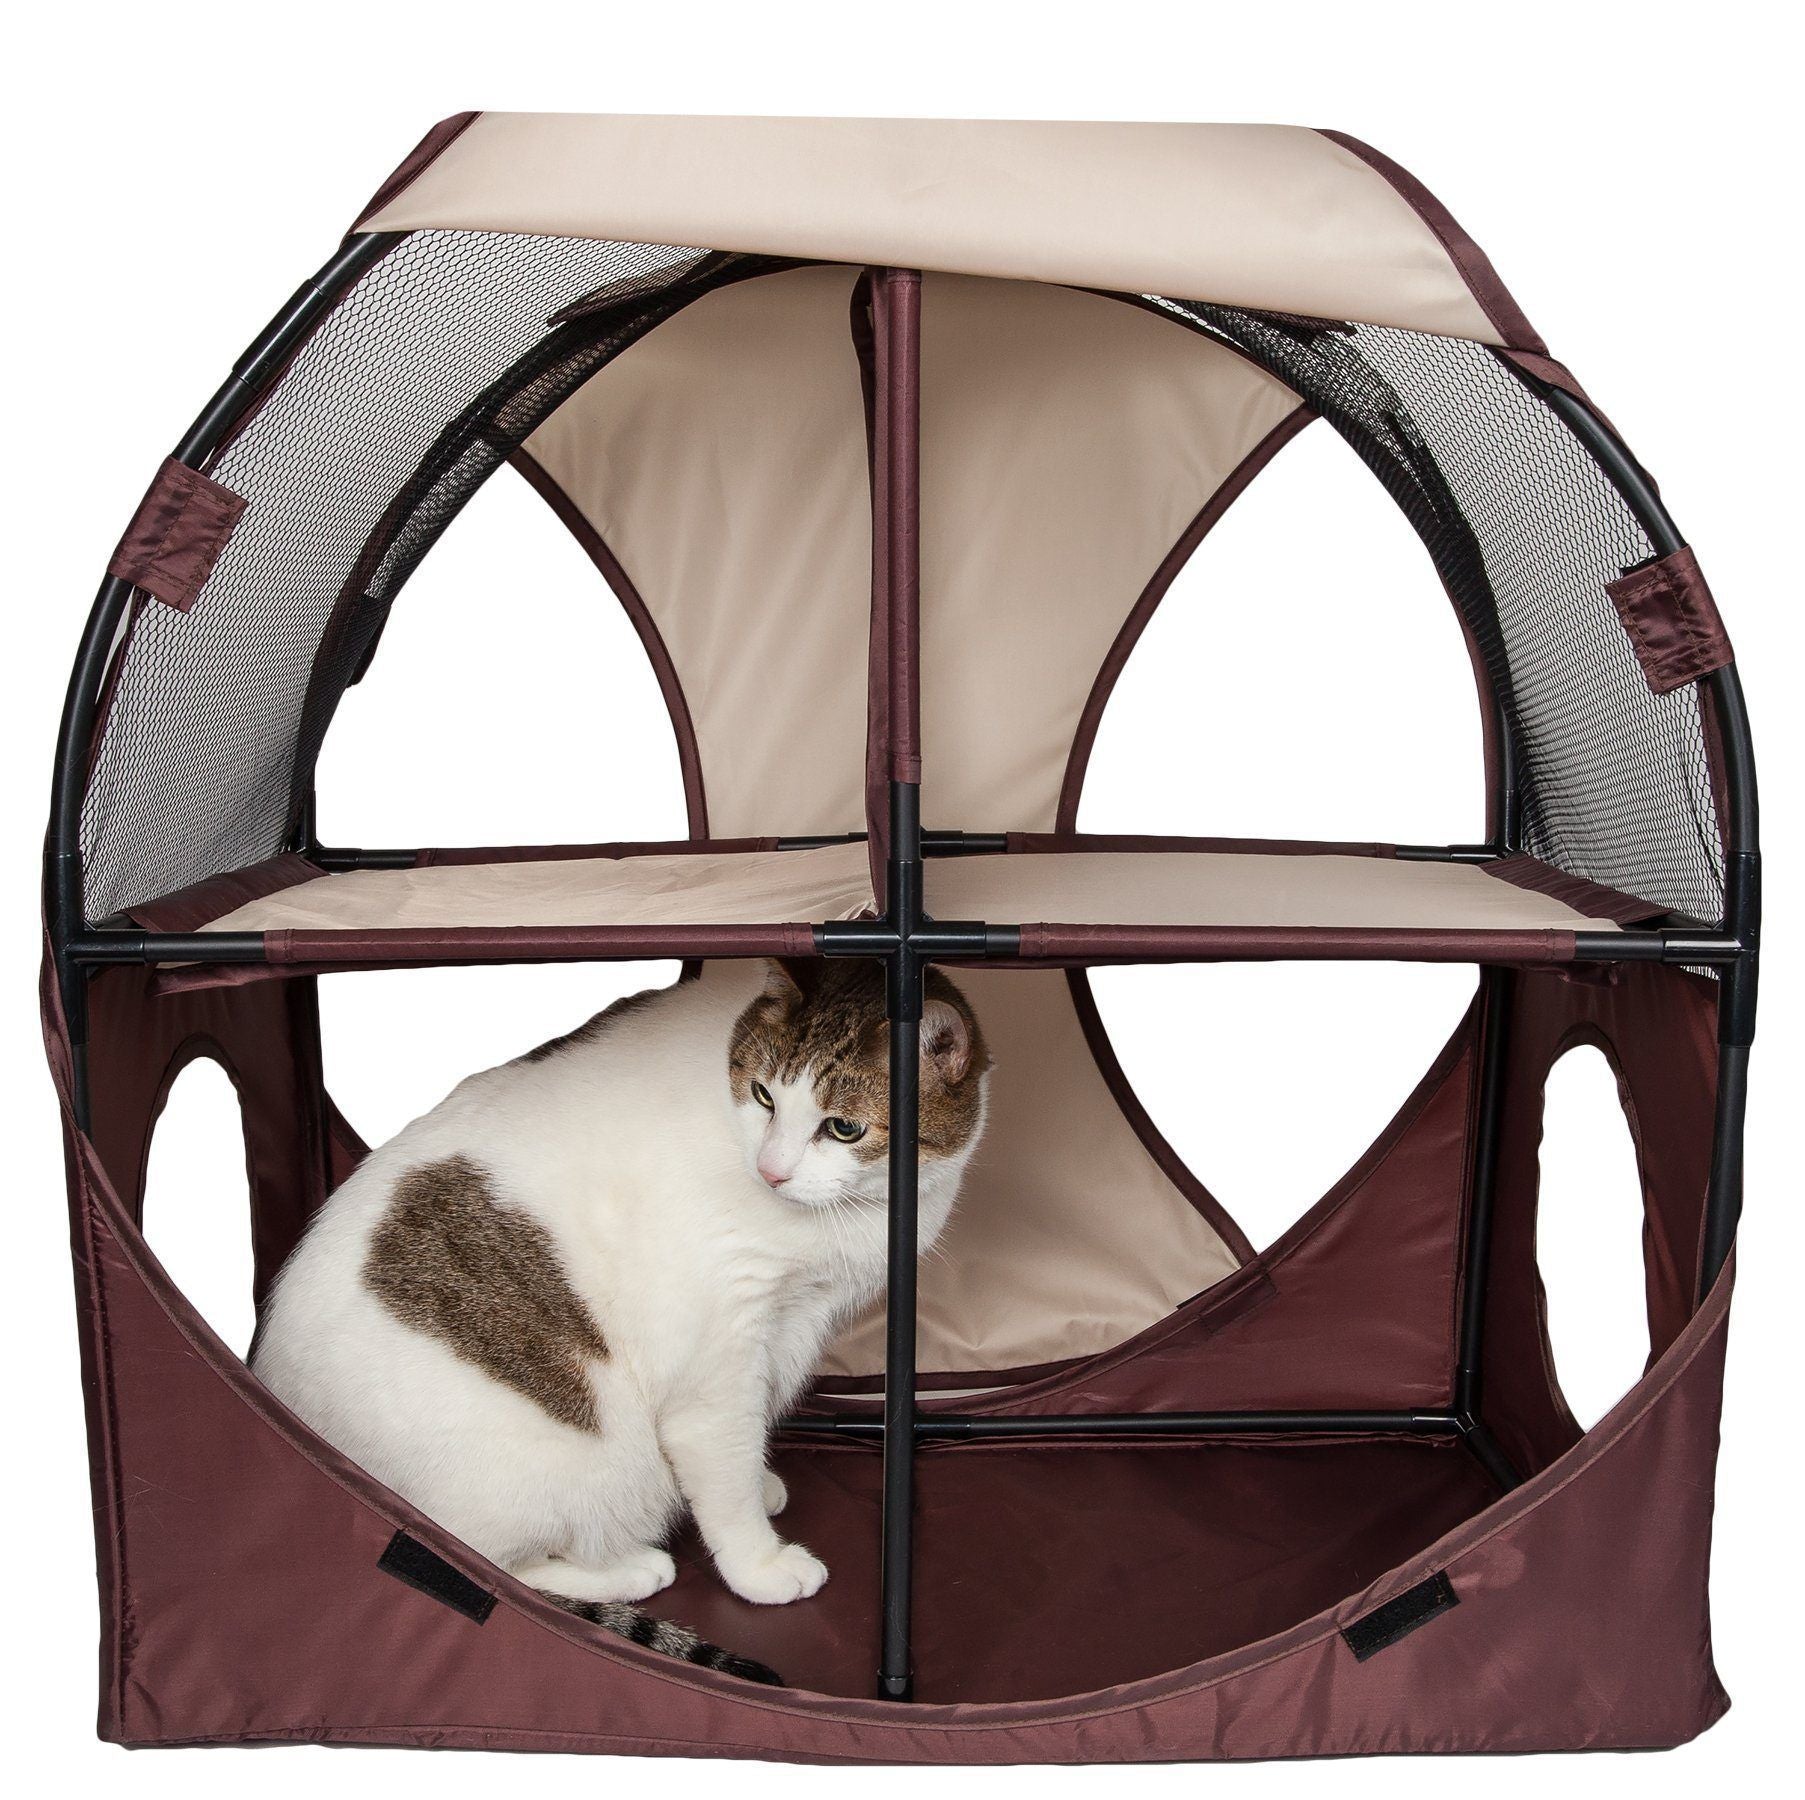 Pet Life ® 'Kitty-Play' Collapsible Travel Interactive Kitty Cat Tree Maze House Lounger Tunnel Lounge  